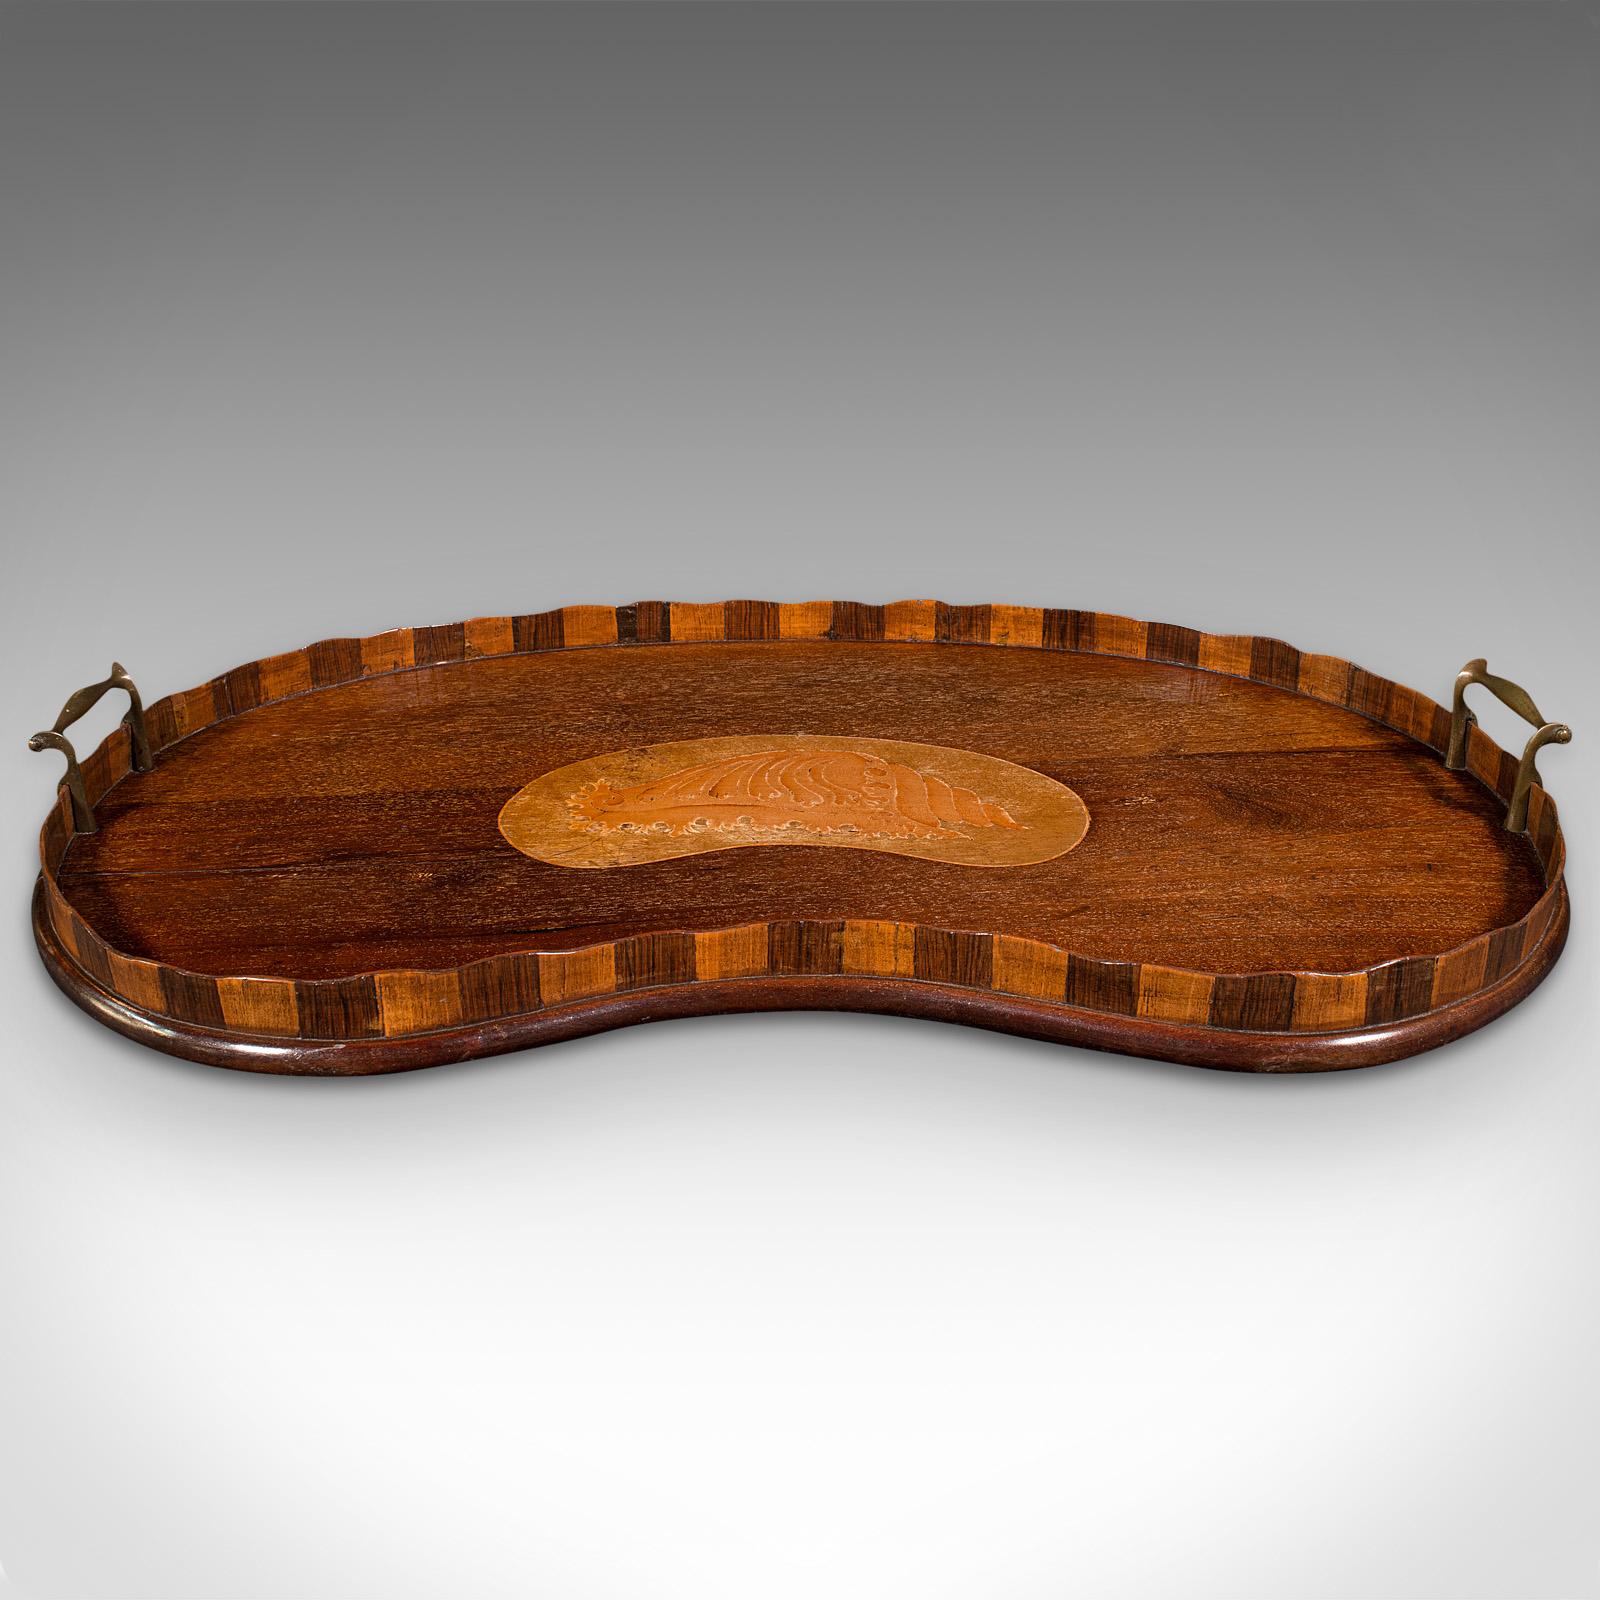 British Antique Butler's Serving Tray, English, Afternoon Tea Plater, Regency, c. 1820 For Sale